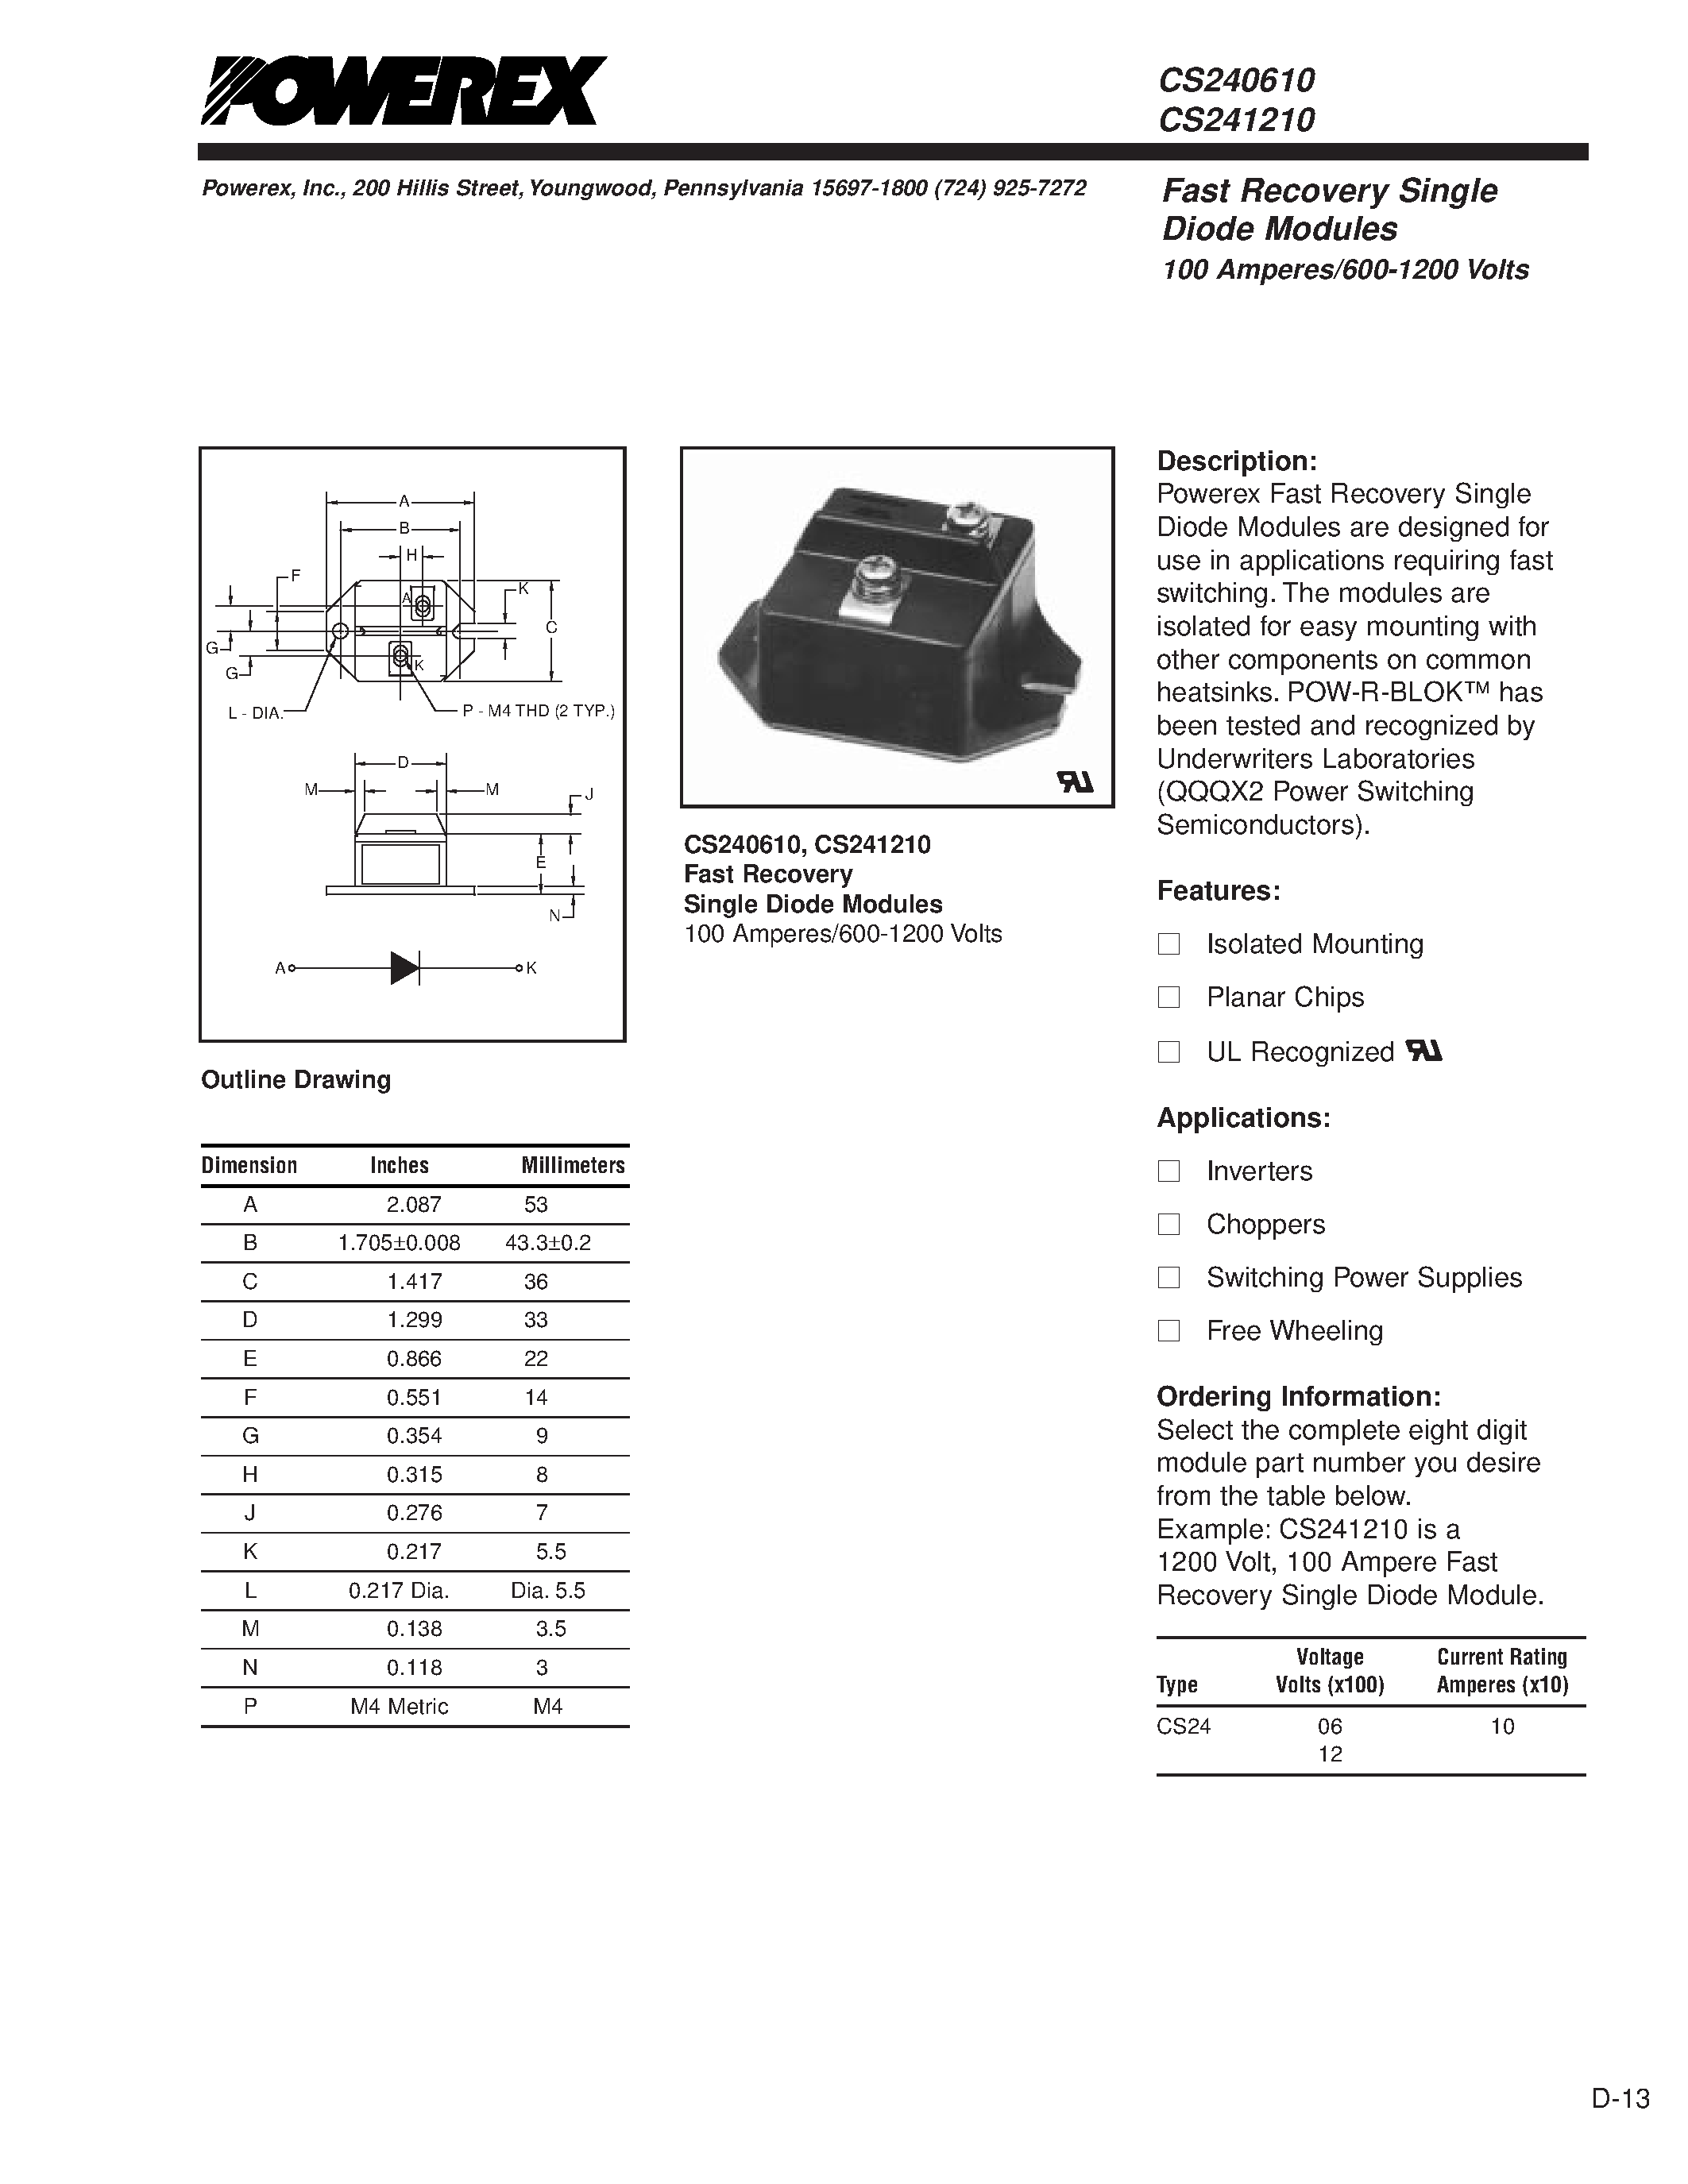 Datasheet CS241210 - Fast Recovery Single Diode Modules 100 Amperes/600-1200 Volts page 1